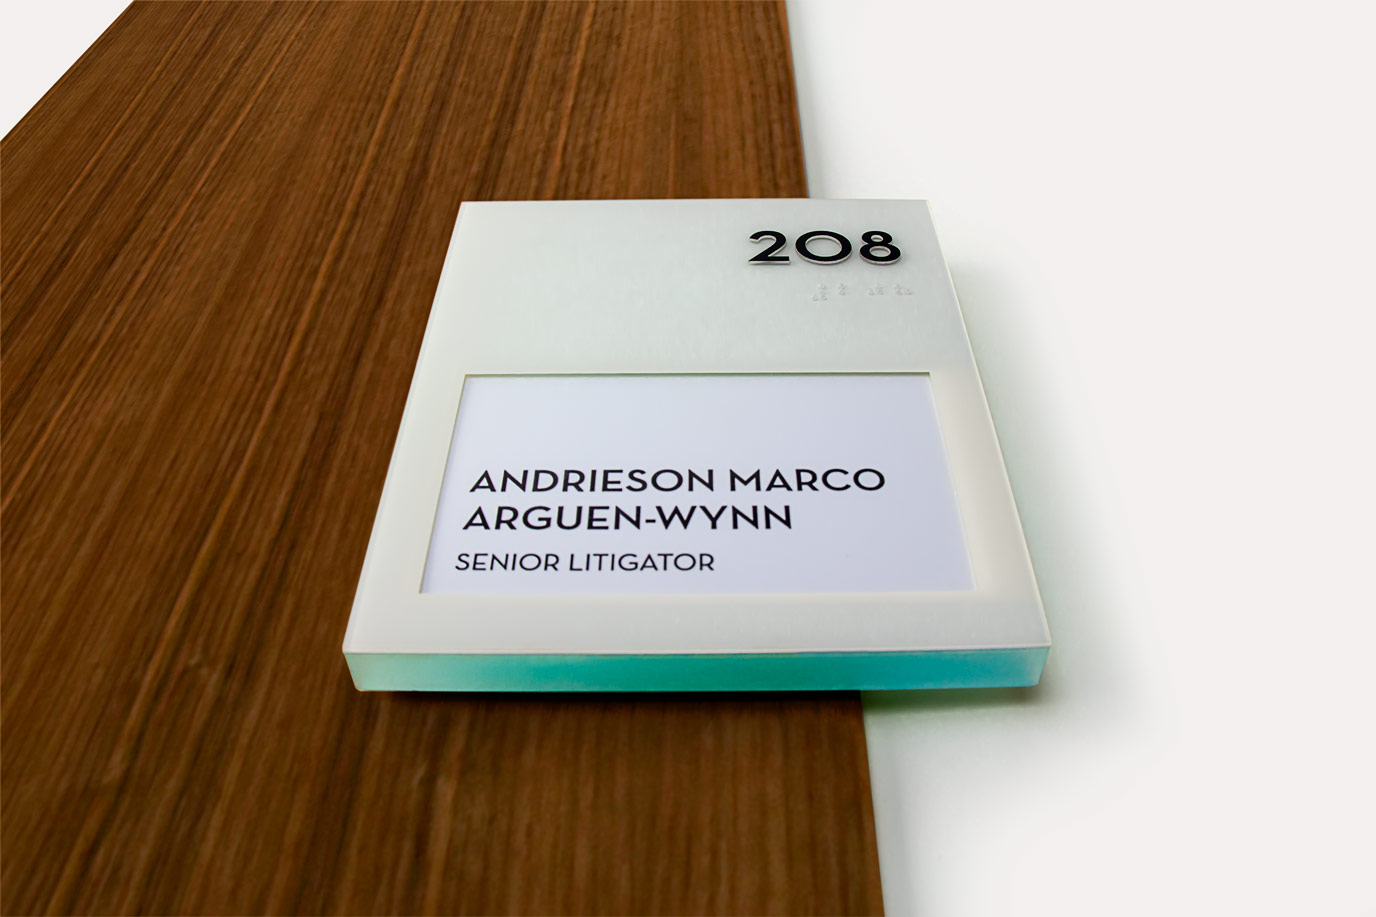 Office Room Identity Detail Signage - Environmental Graphics System